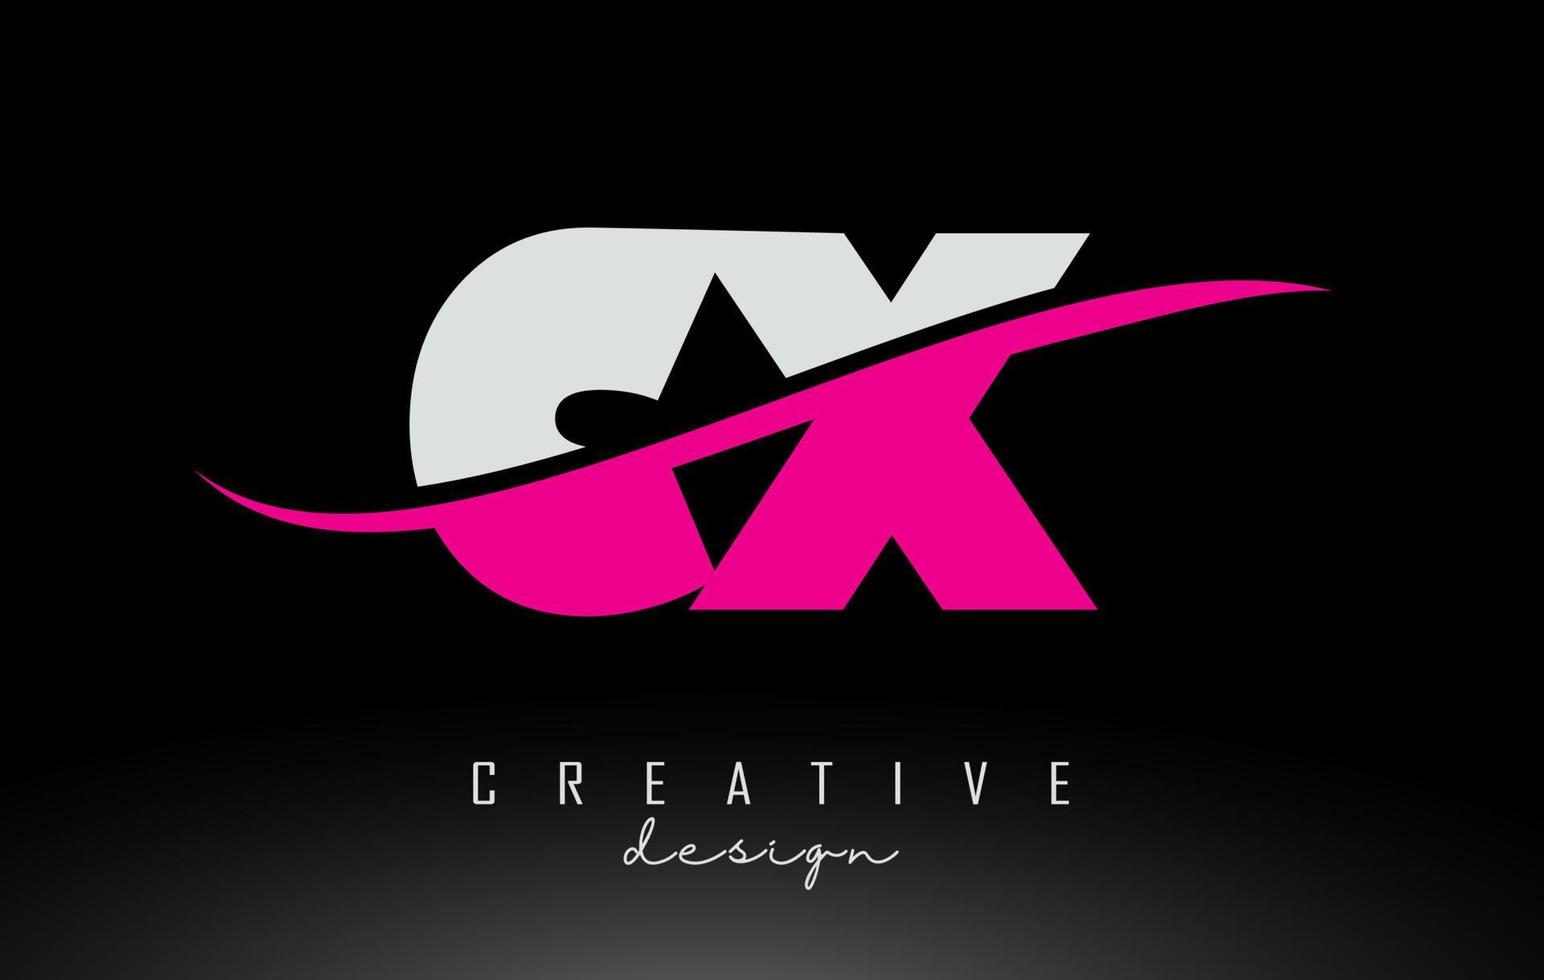 CX C X White and Pink Letter Logo with Swoosh. vector